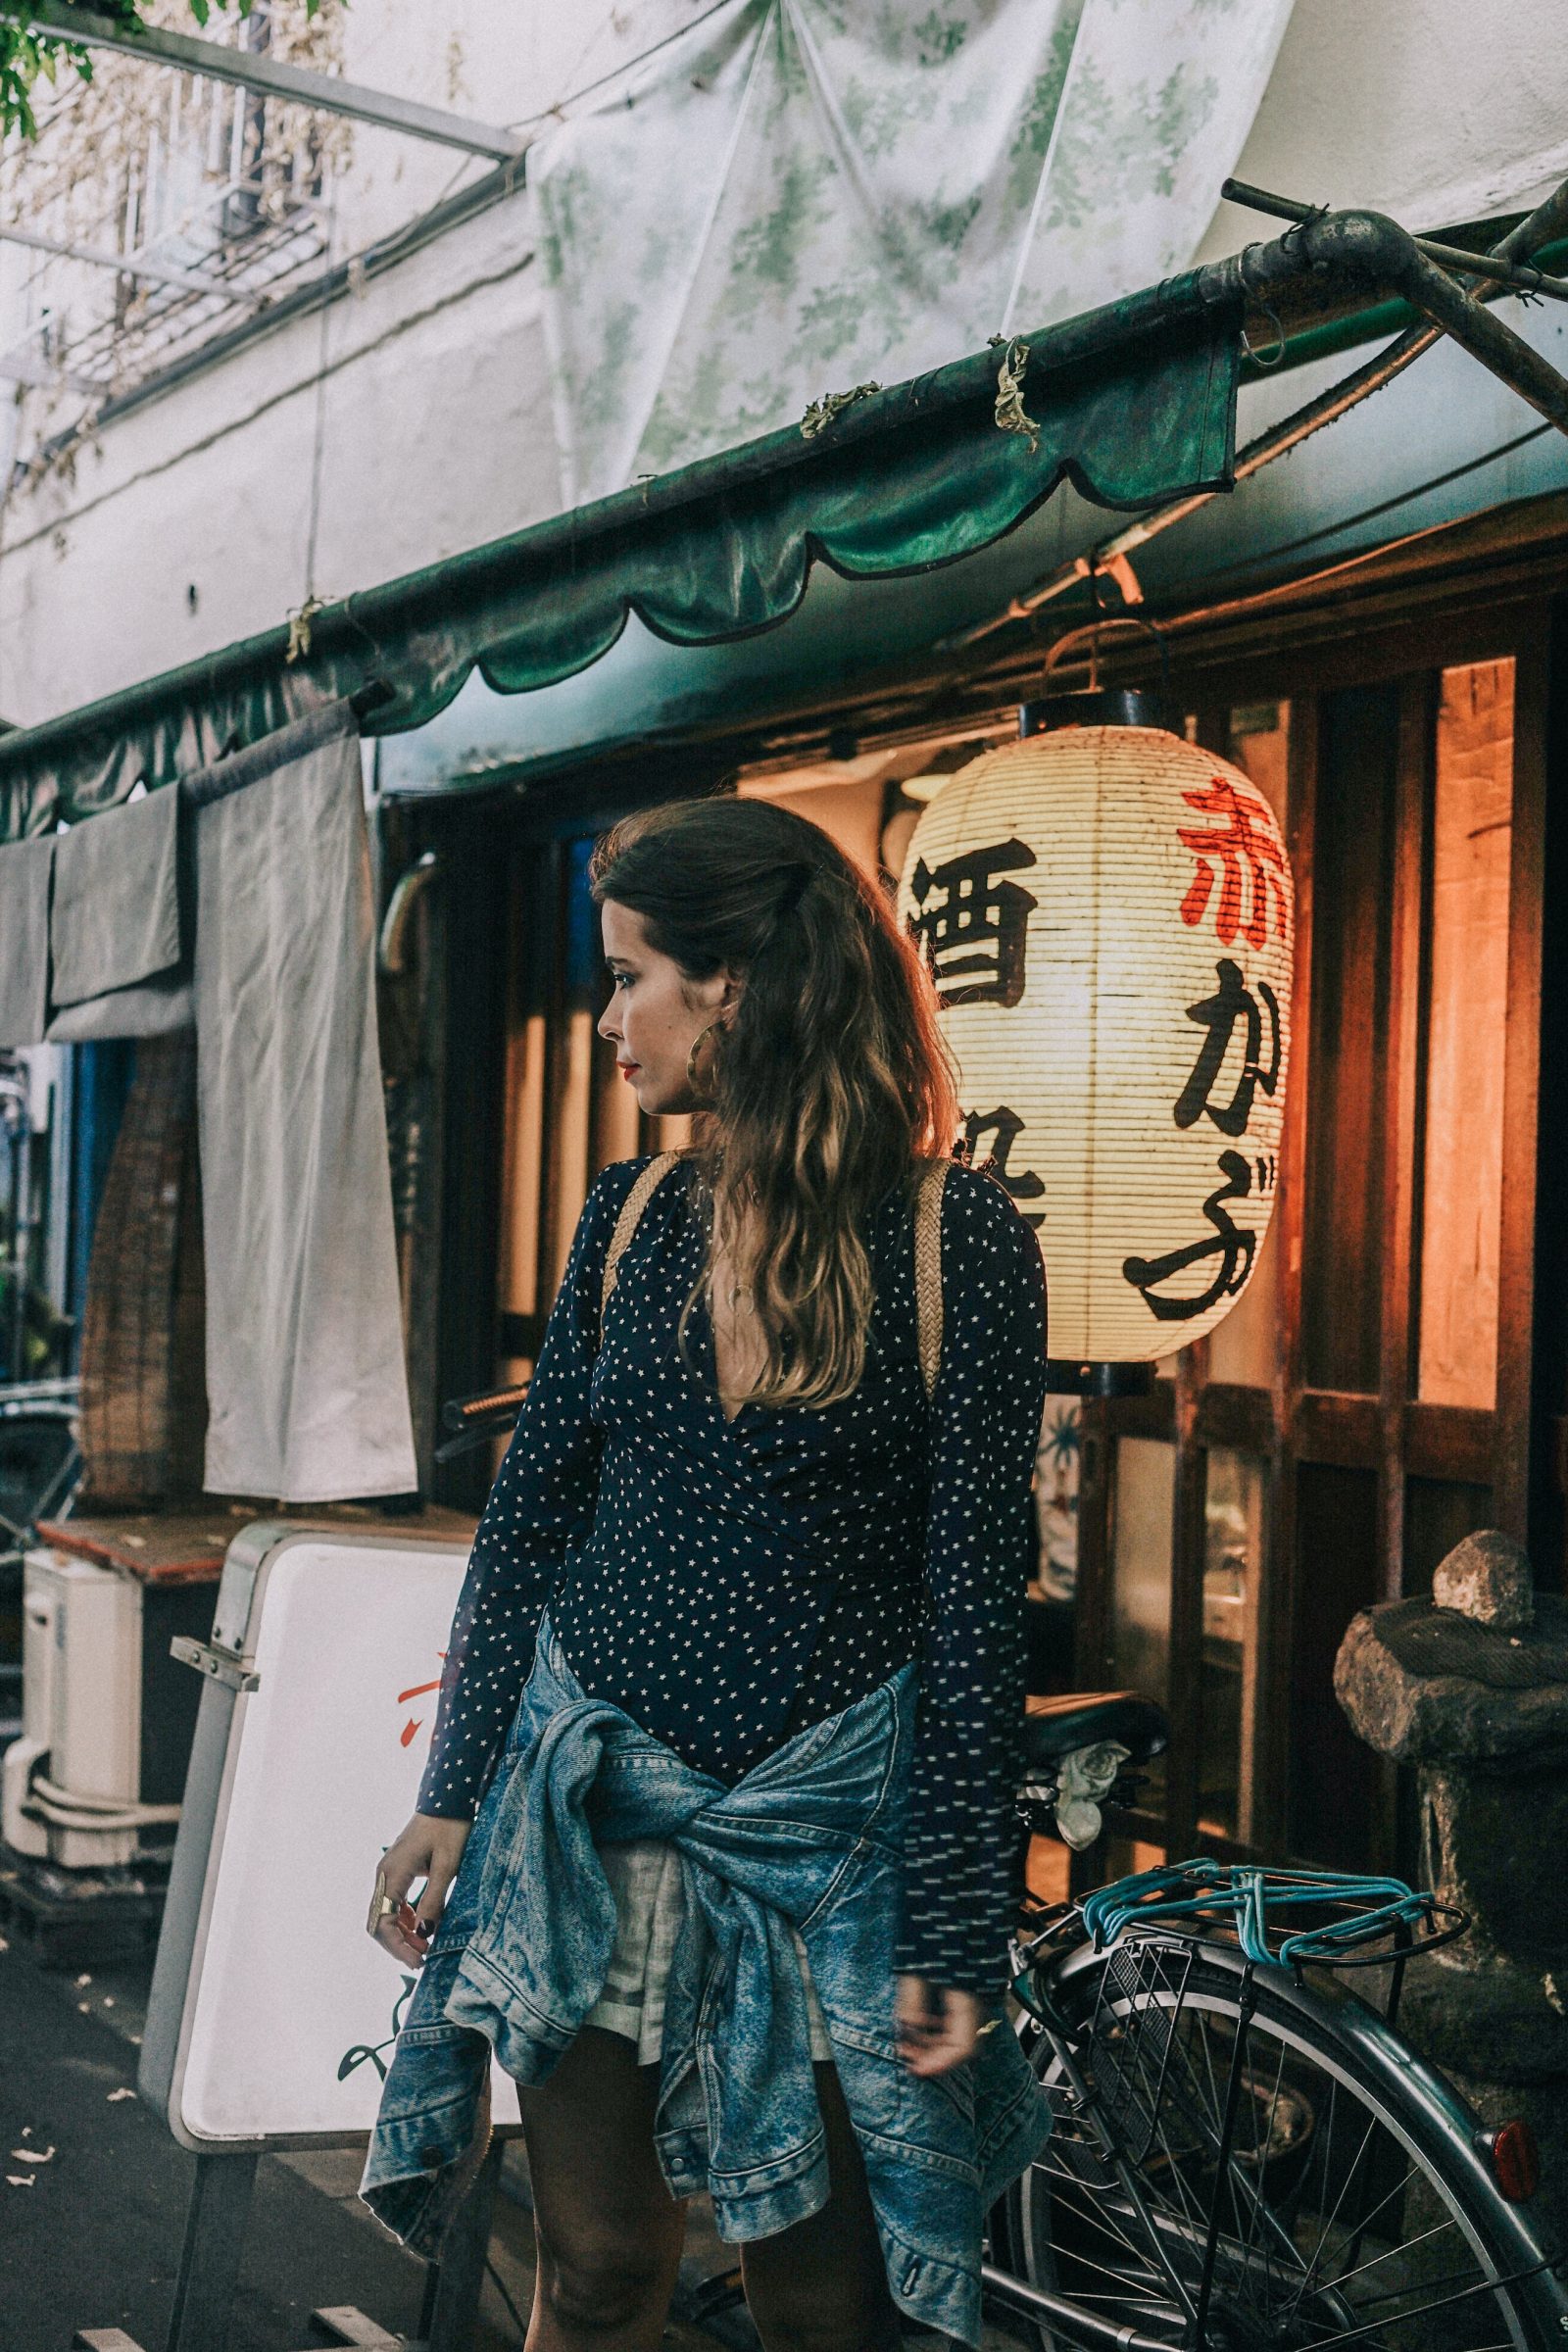 Tokyo_Travel_Guide-Outfit-Collage_Vintage-Street_Style-Reformation_Shorts-Realisation_Par_Stars_Blouse-Sneakers-Flea_Market_Backpack-101